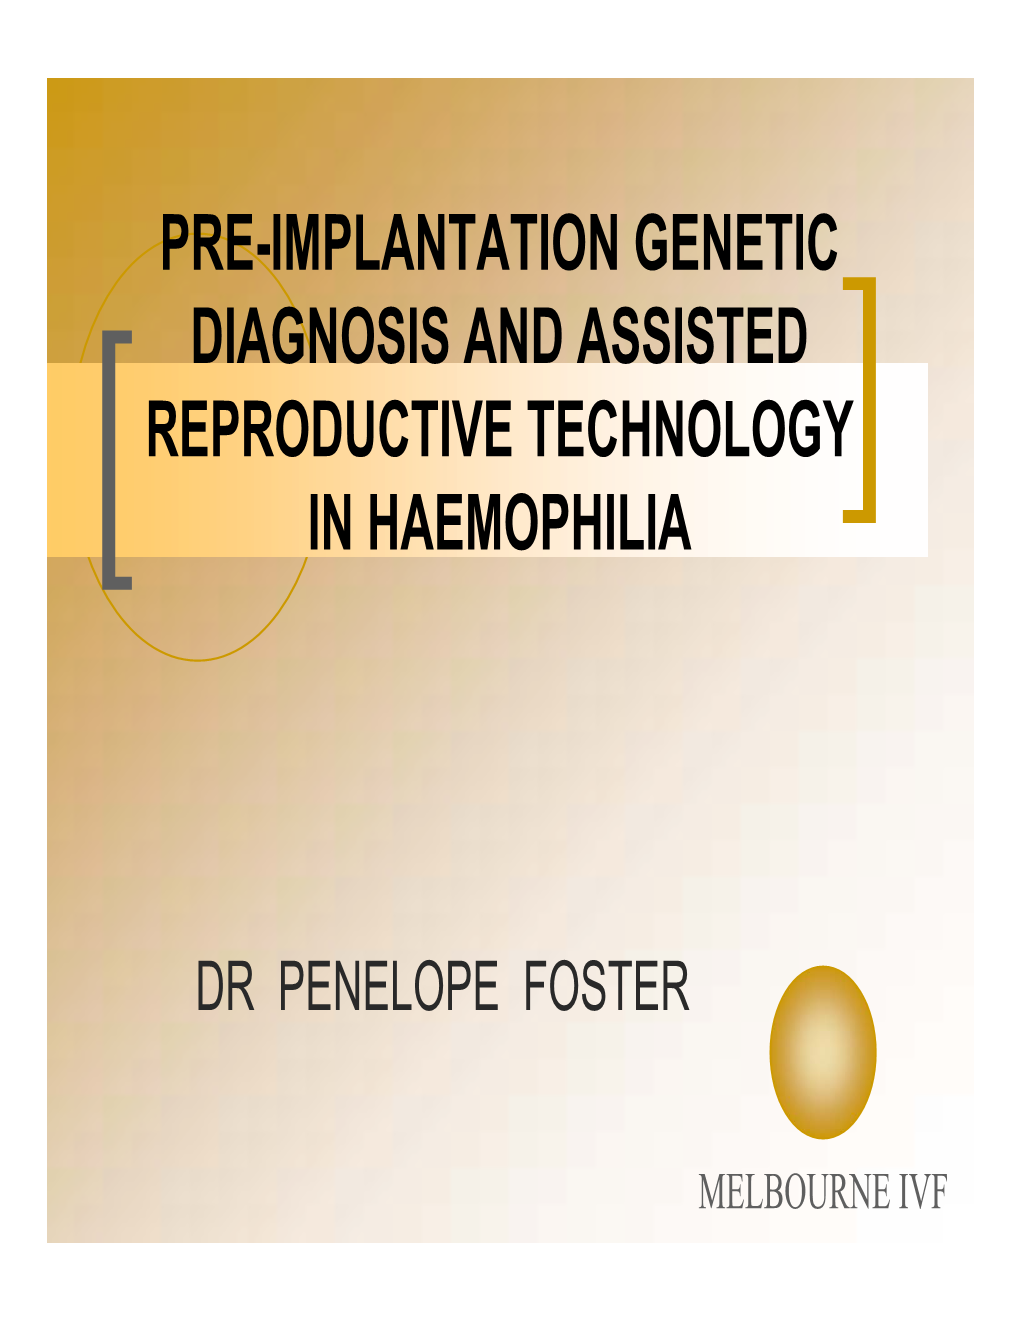 Pre-Implantation Genetic Diagnosis and Assisted Reproductive Technology in Haemophilia